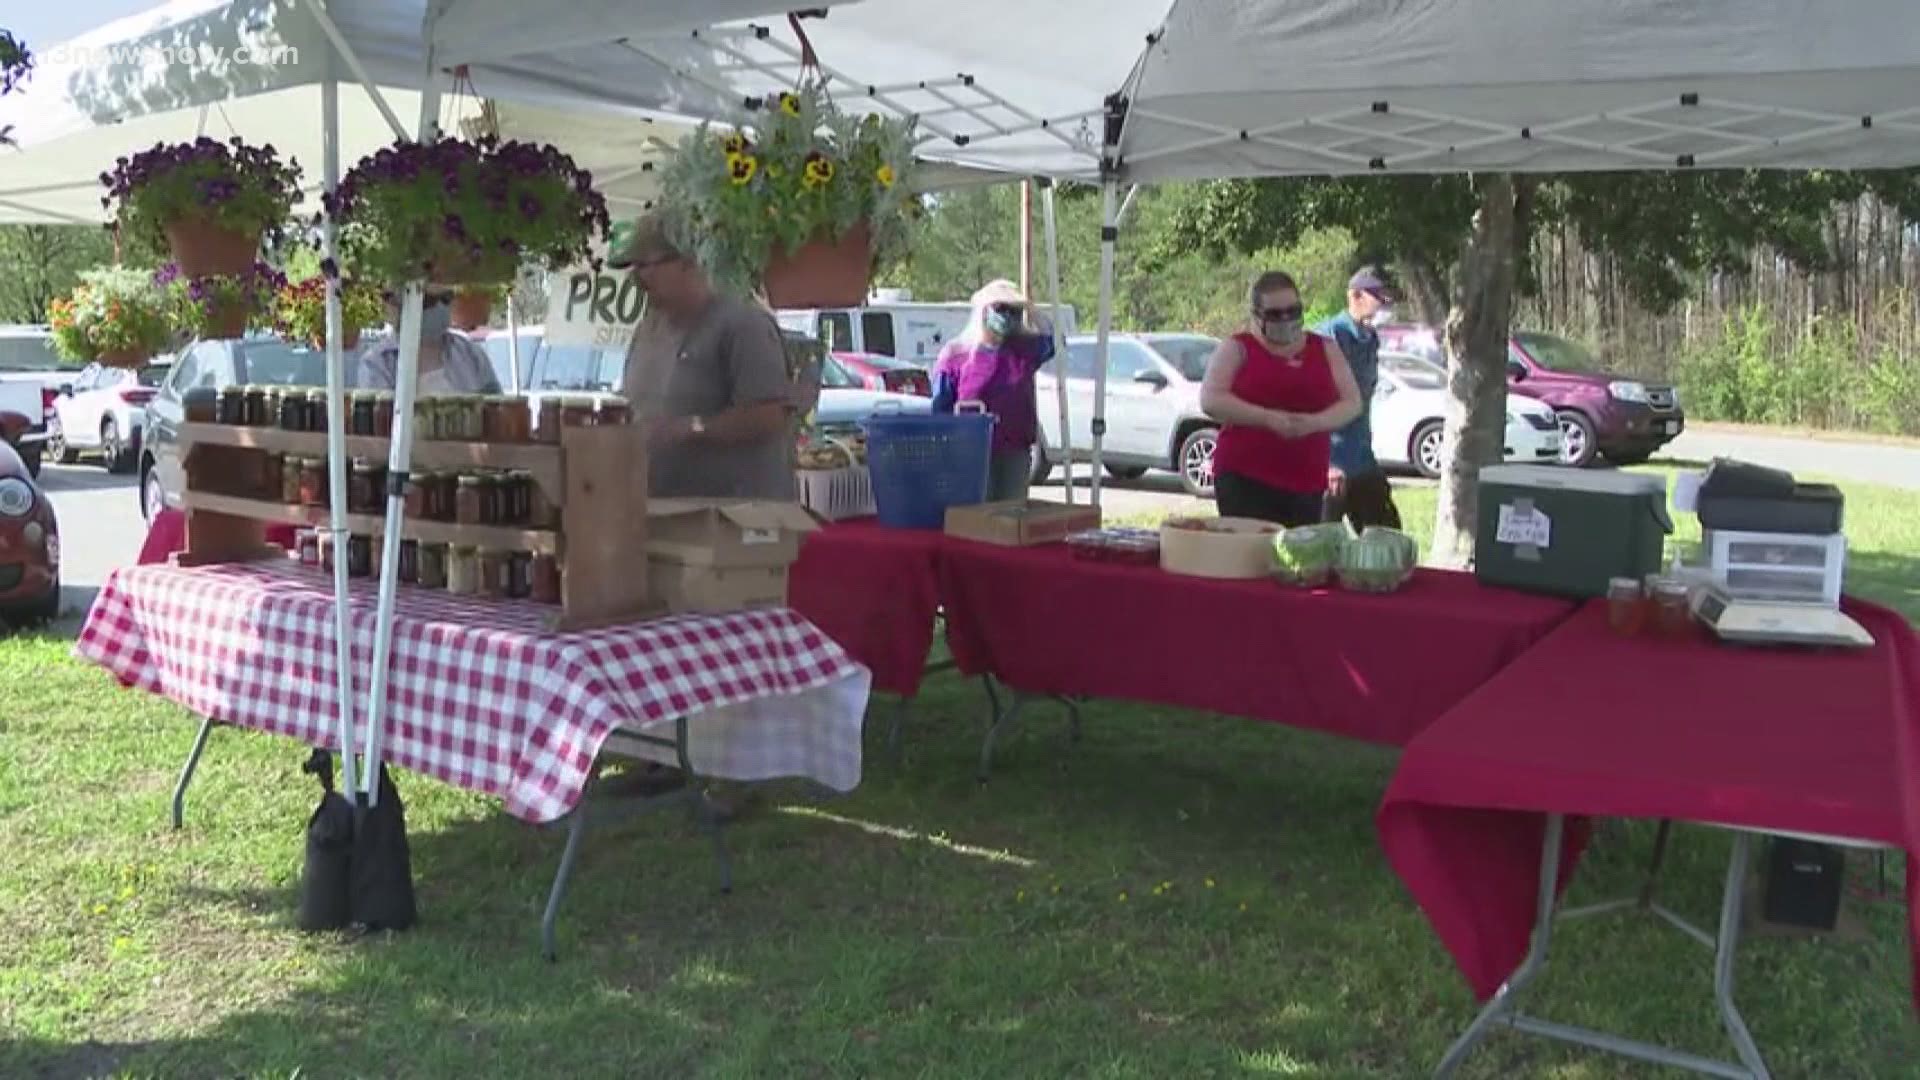 Chesapeake Health Department's Women, Infants and Children (WIC) nutrition program started a farmer's market, offering food to those in need who qualify.